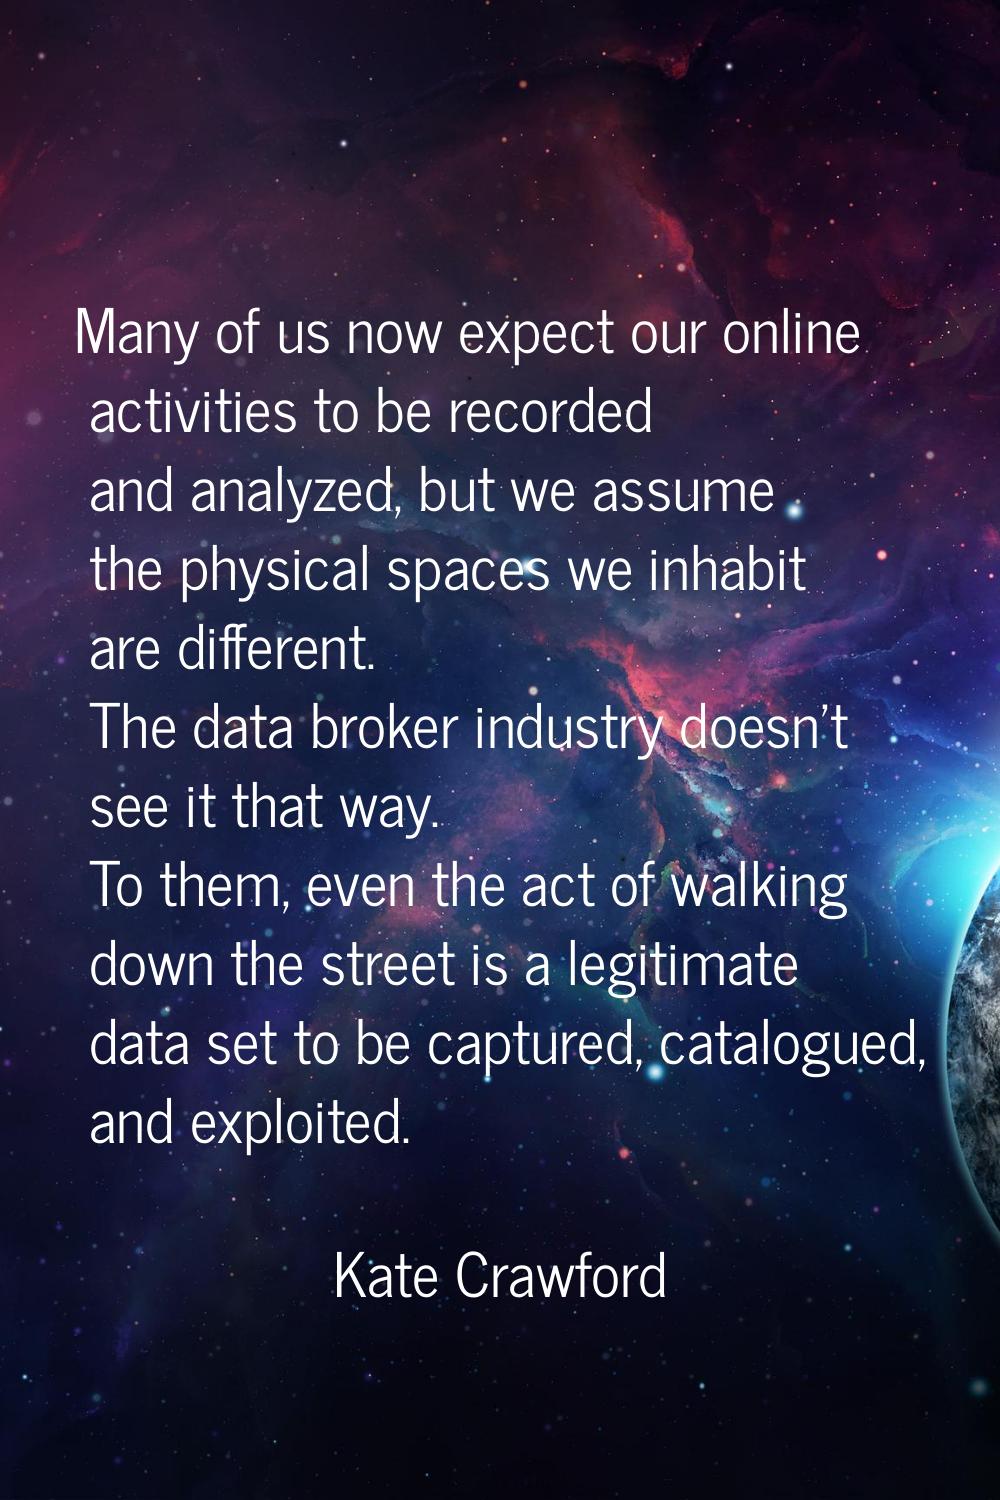 Many of us now expect our online activities to be recorded and analyzed, but we assume the physical